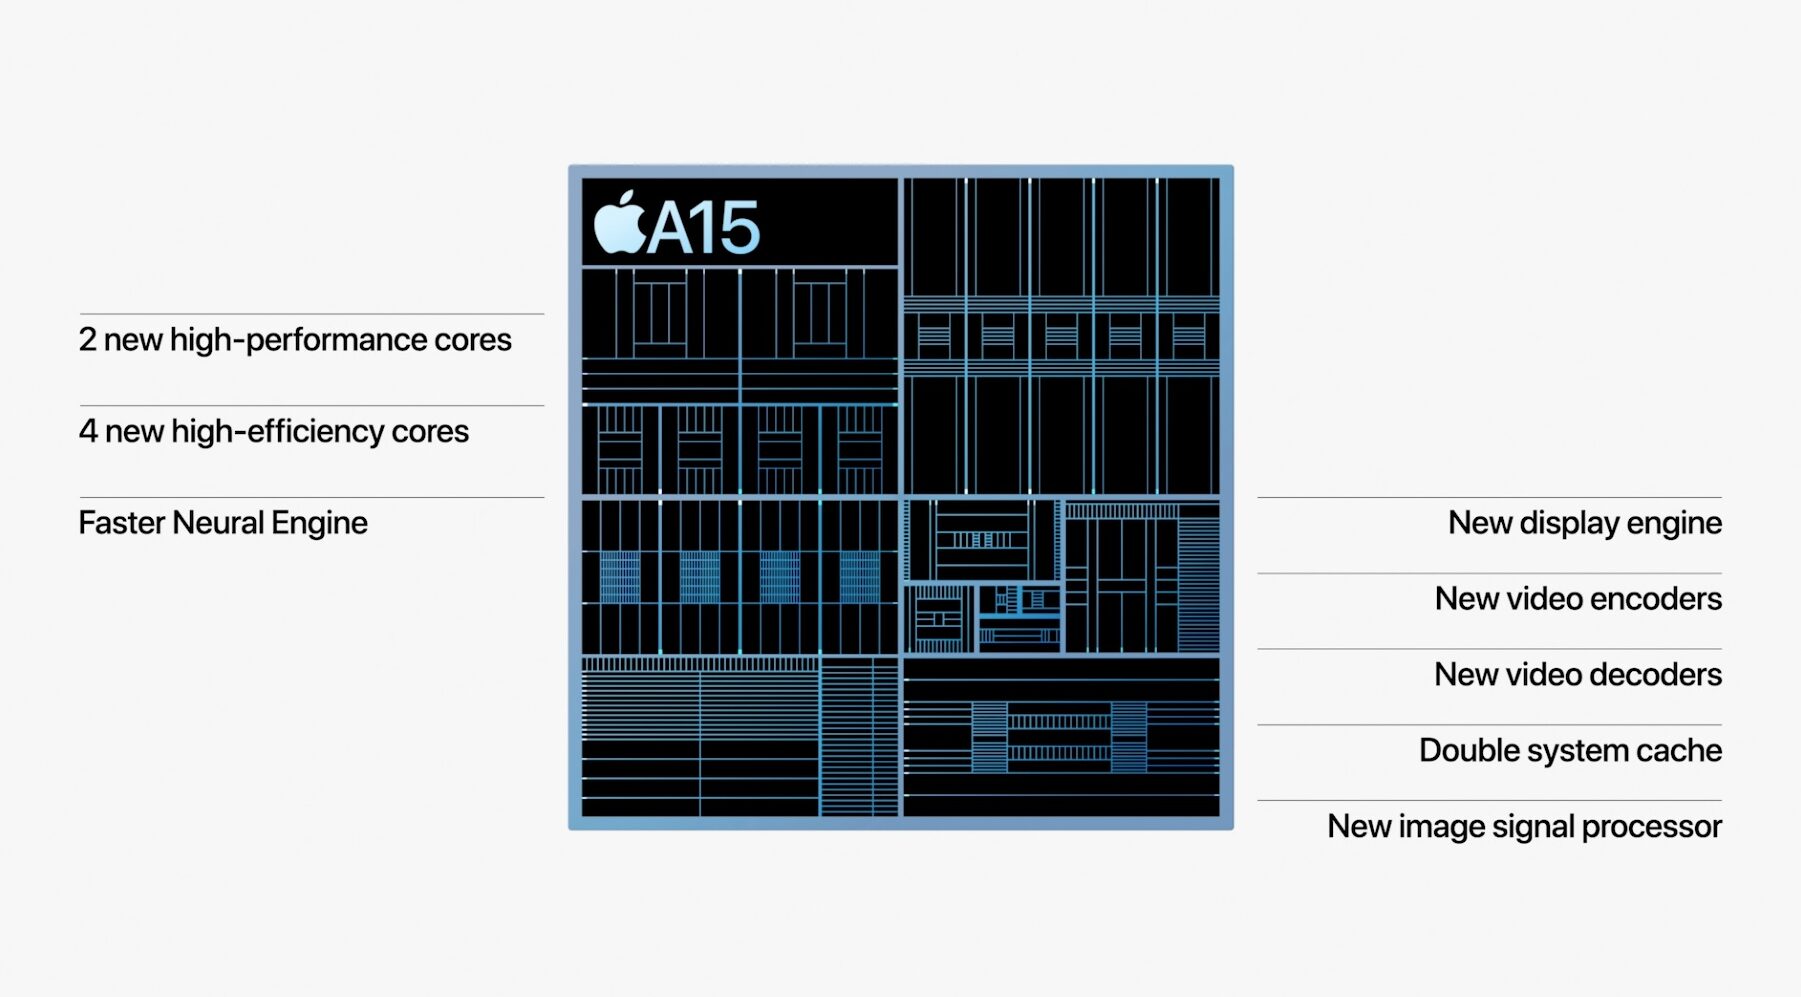 A slide from Apple's September 2021 “California Streaming” event showing the Apple A15 Bionic floorplan with the key features highlighted